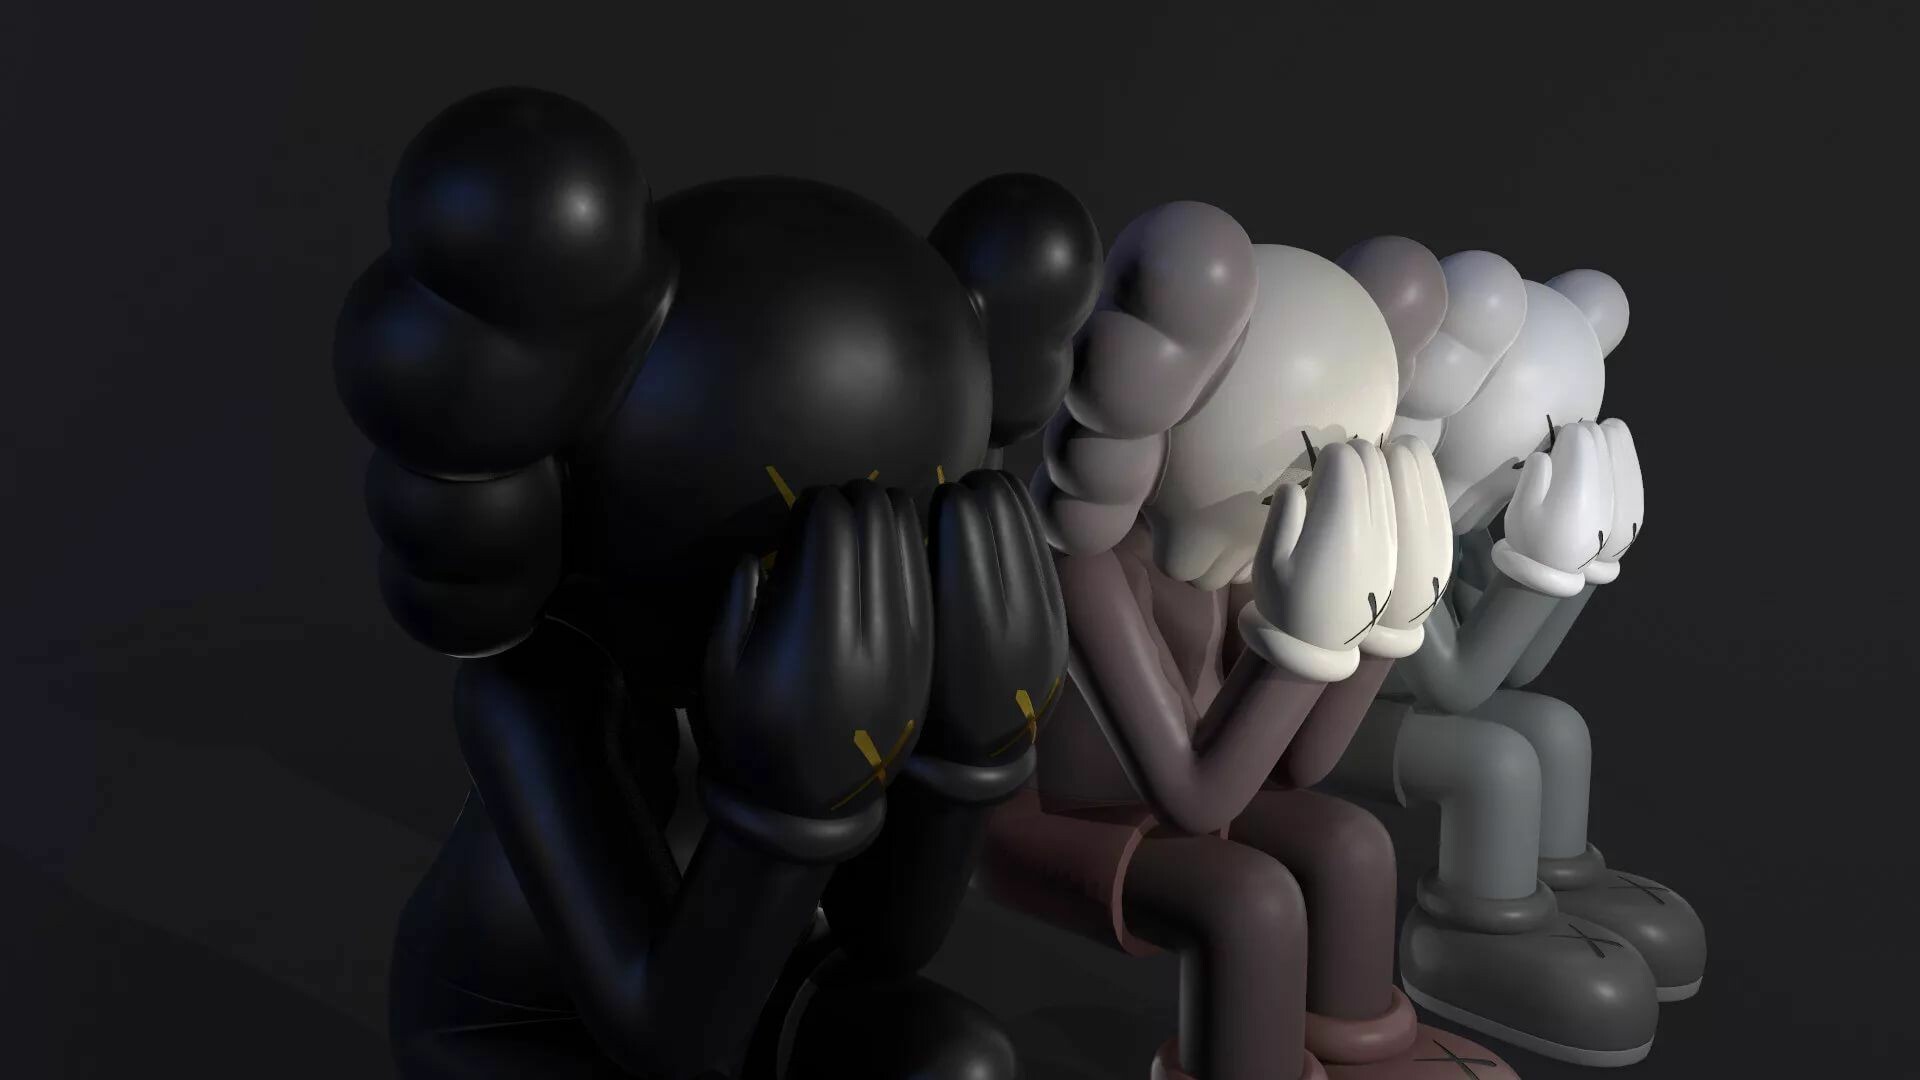 KAWS: Companion is a grayscale clown-like figure based on Mickey Mouse. 1920x1080 Full HD Background.